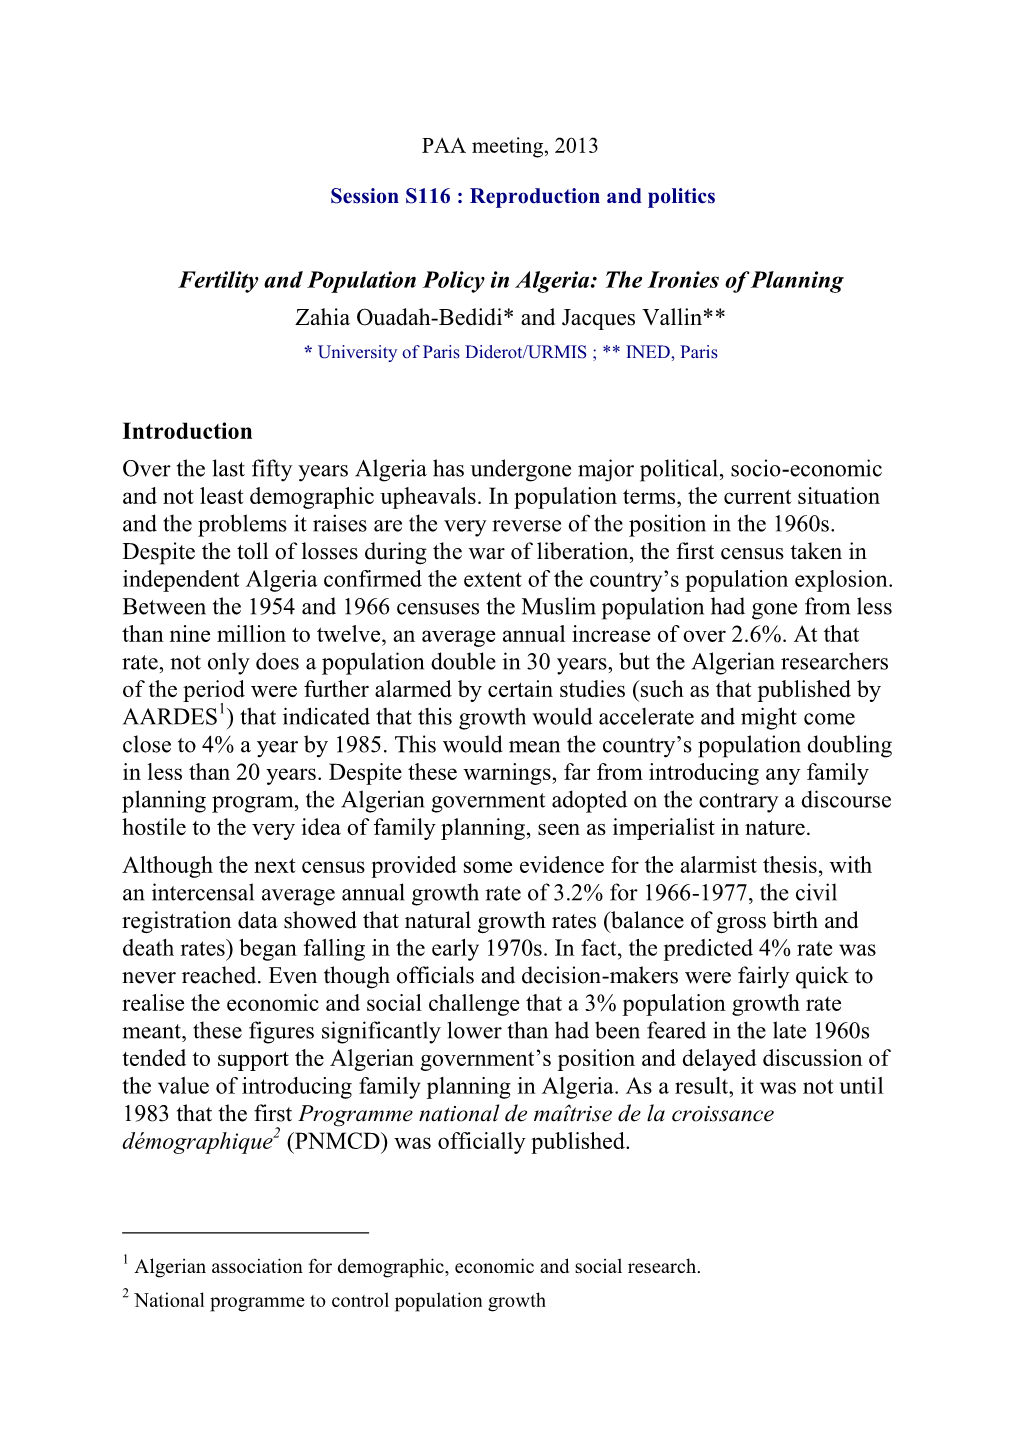 Fertility and Population Policy in Algeria: the Ironies of Planning Zahia Ouadah-Bedidi* and Jacques Vallin** * University of Paris Diderot/URMIS ; ** INED, Paris